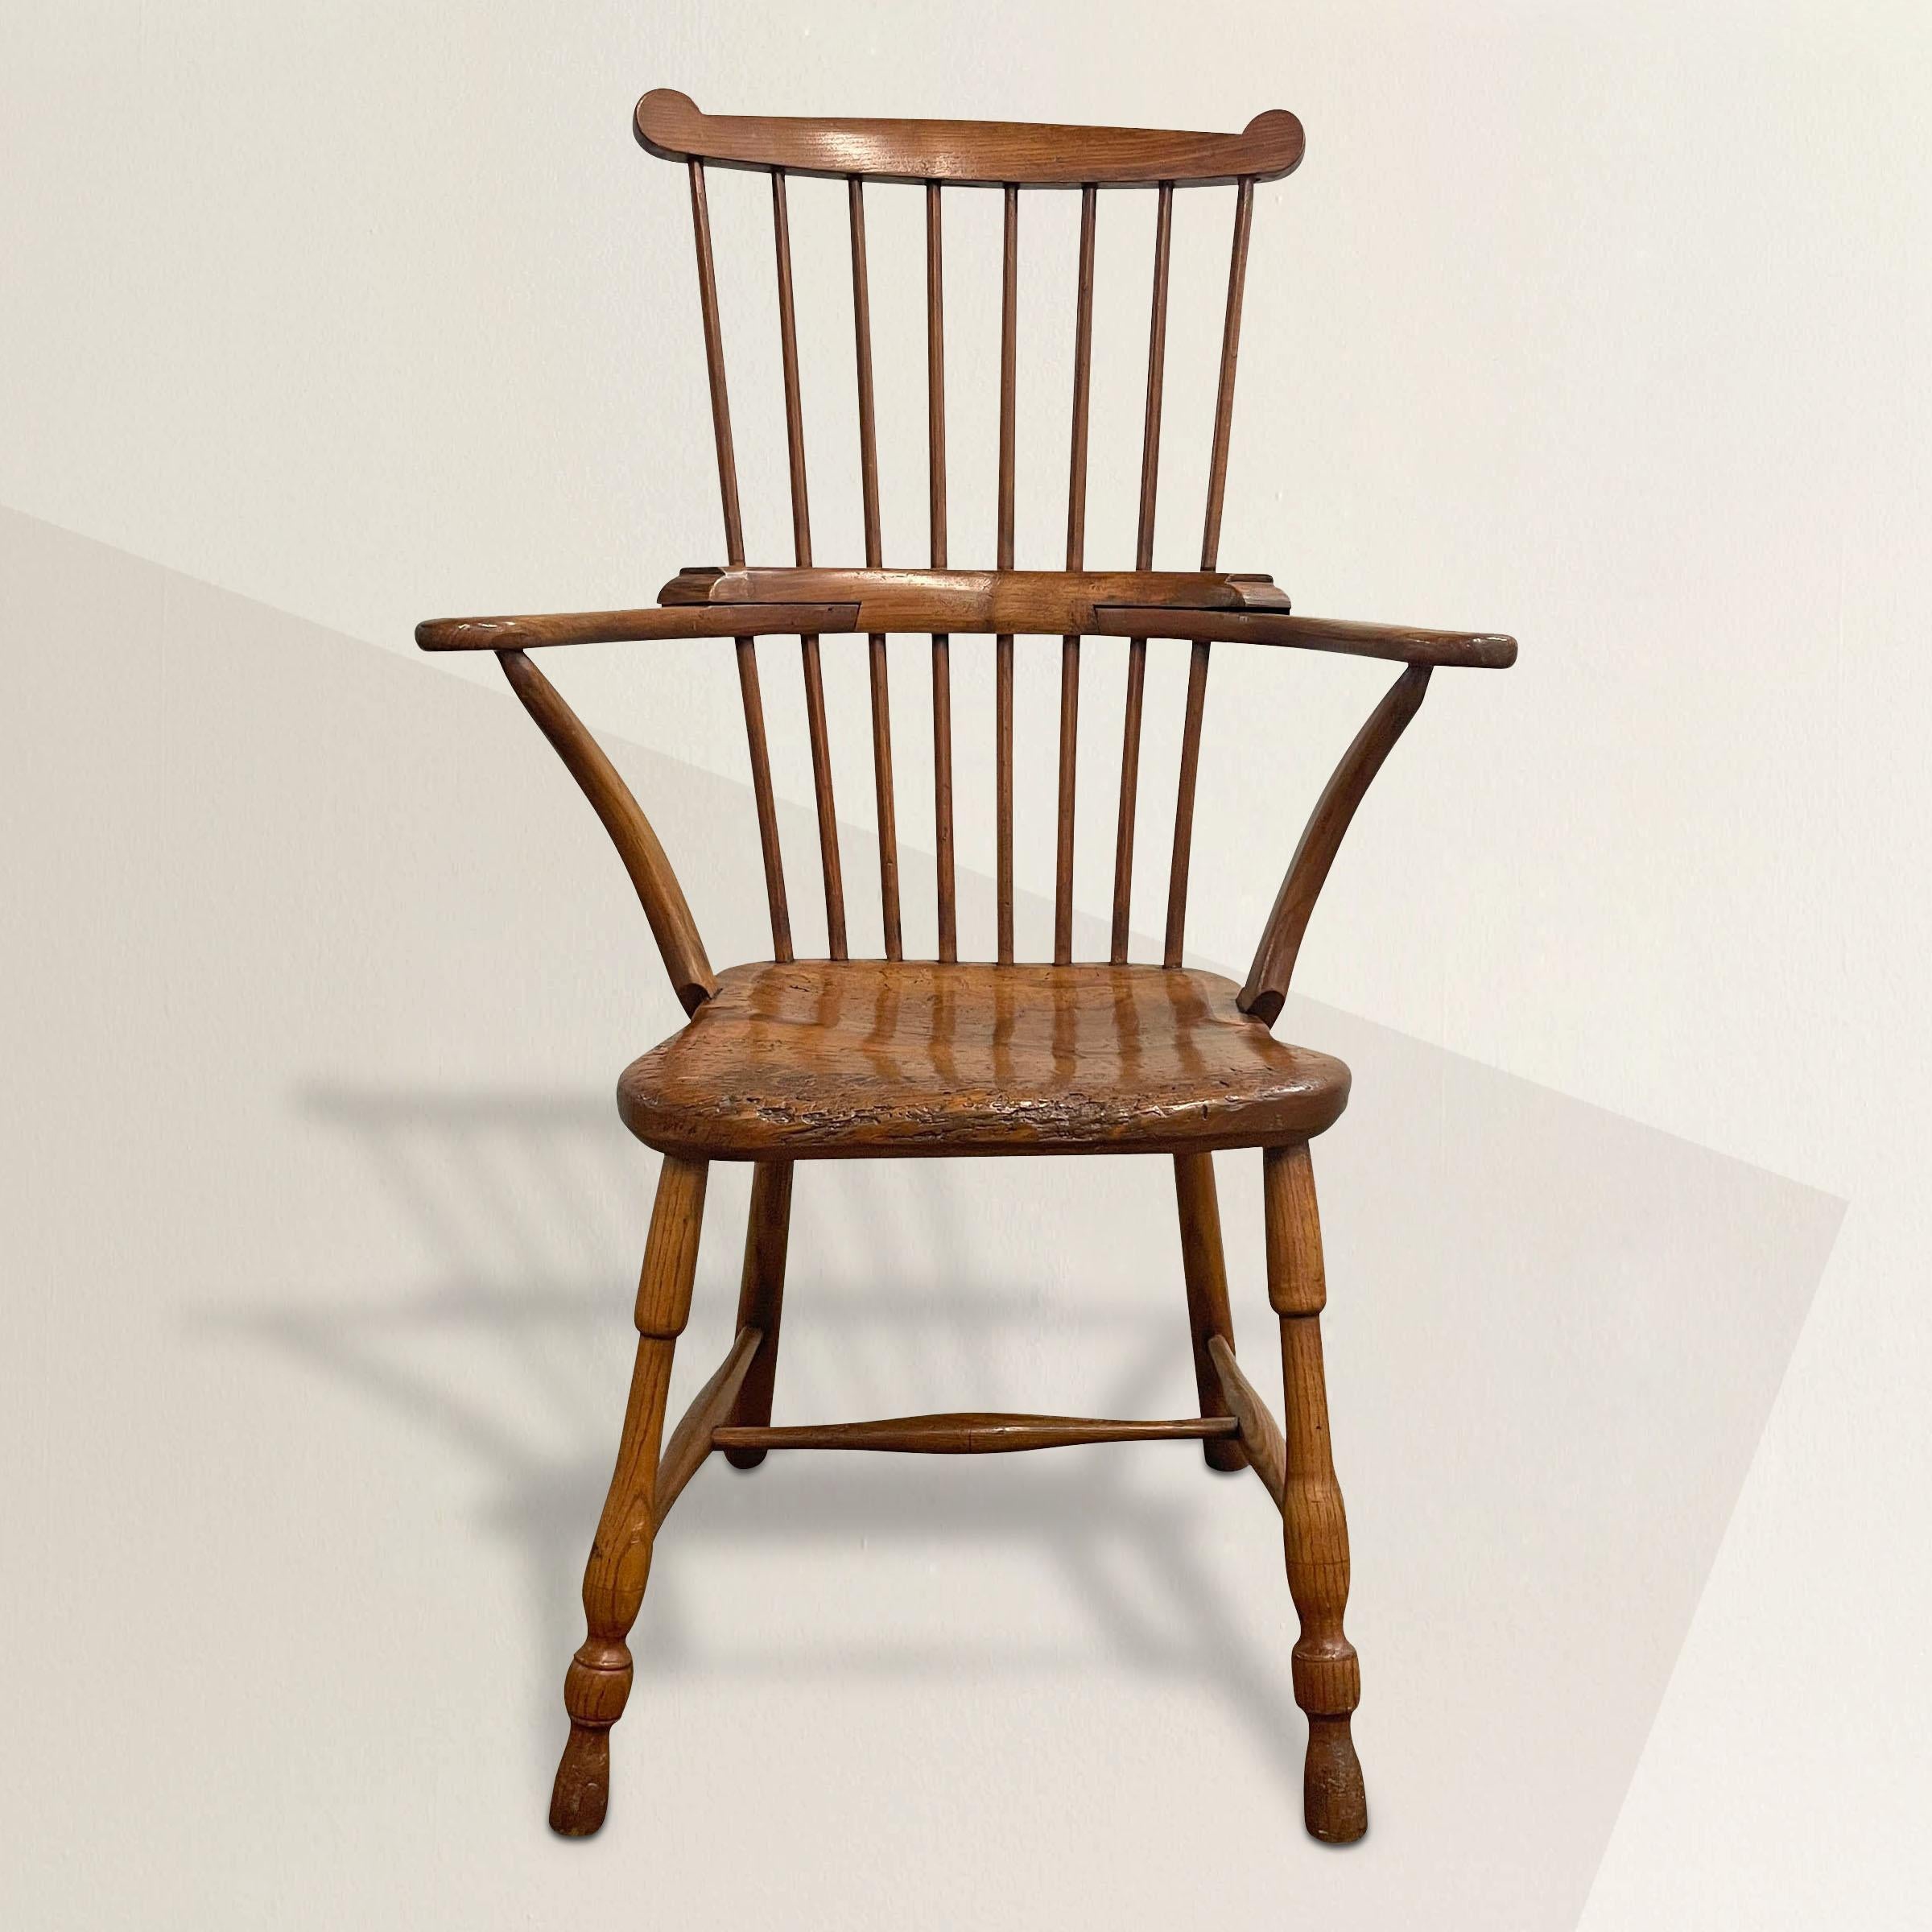 A handsome 19th century English ash and beech comb-back Windsor chair from the Thames Valley, with out-turned arms supported by inverted stretchers, wonderfully turned legs connected by turned stretcher, and a solid beech seat. The seat is one piece